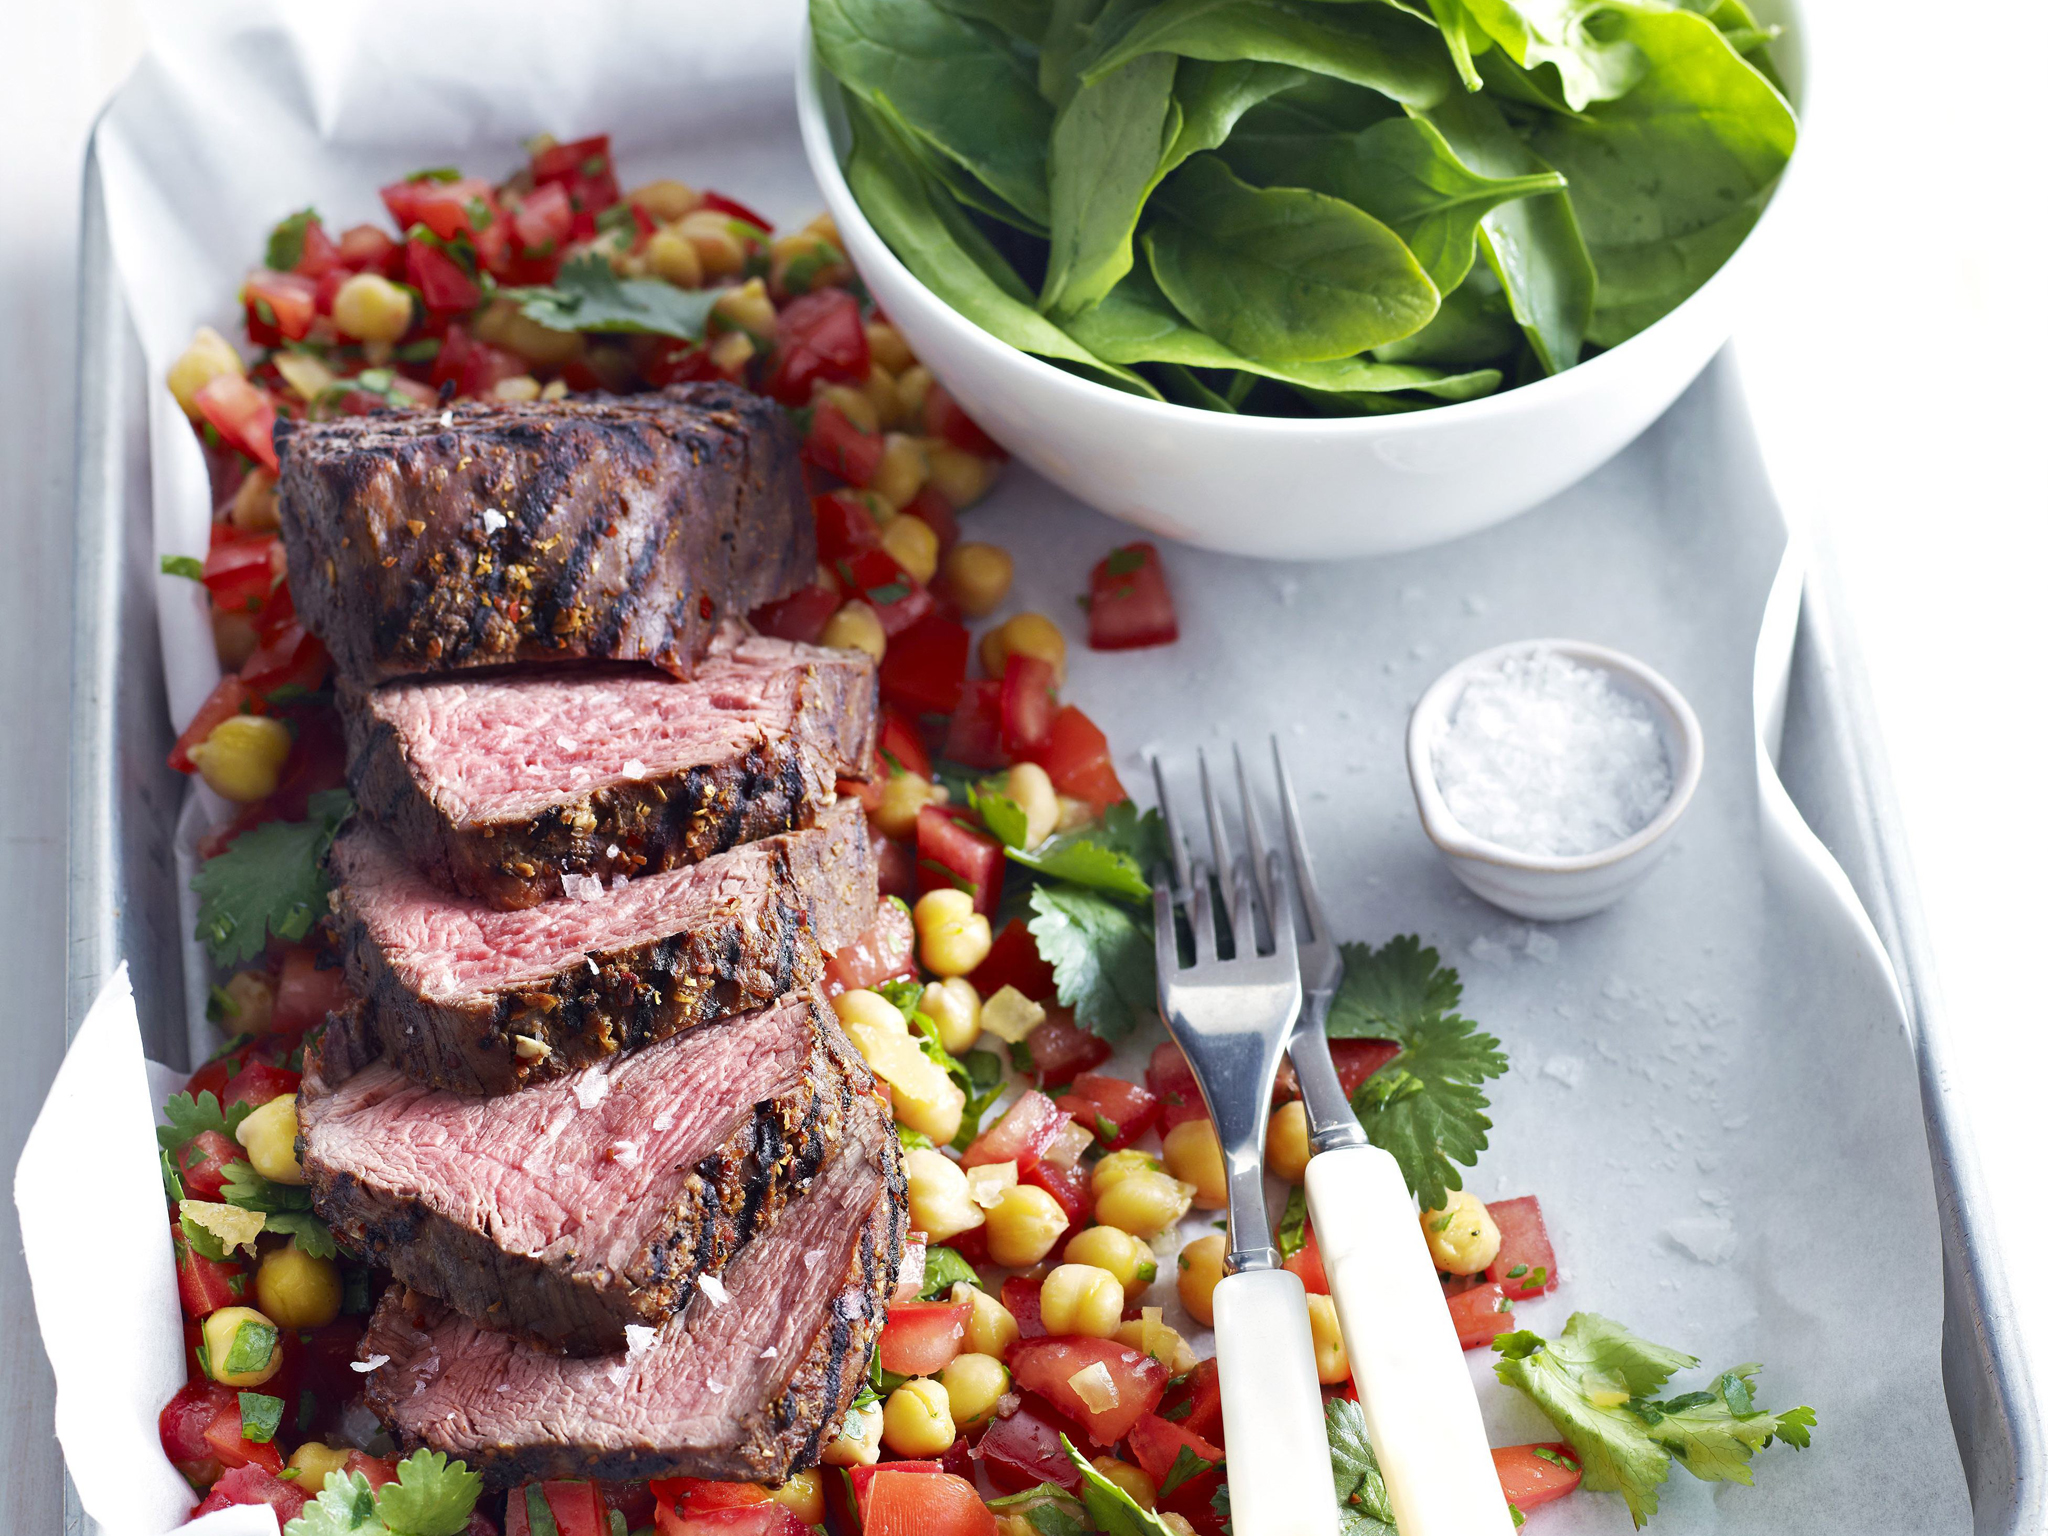 Spice-rubbed beef fillet with chickpea and preserved lemon salad